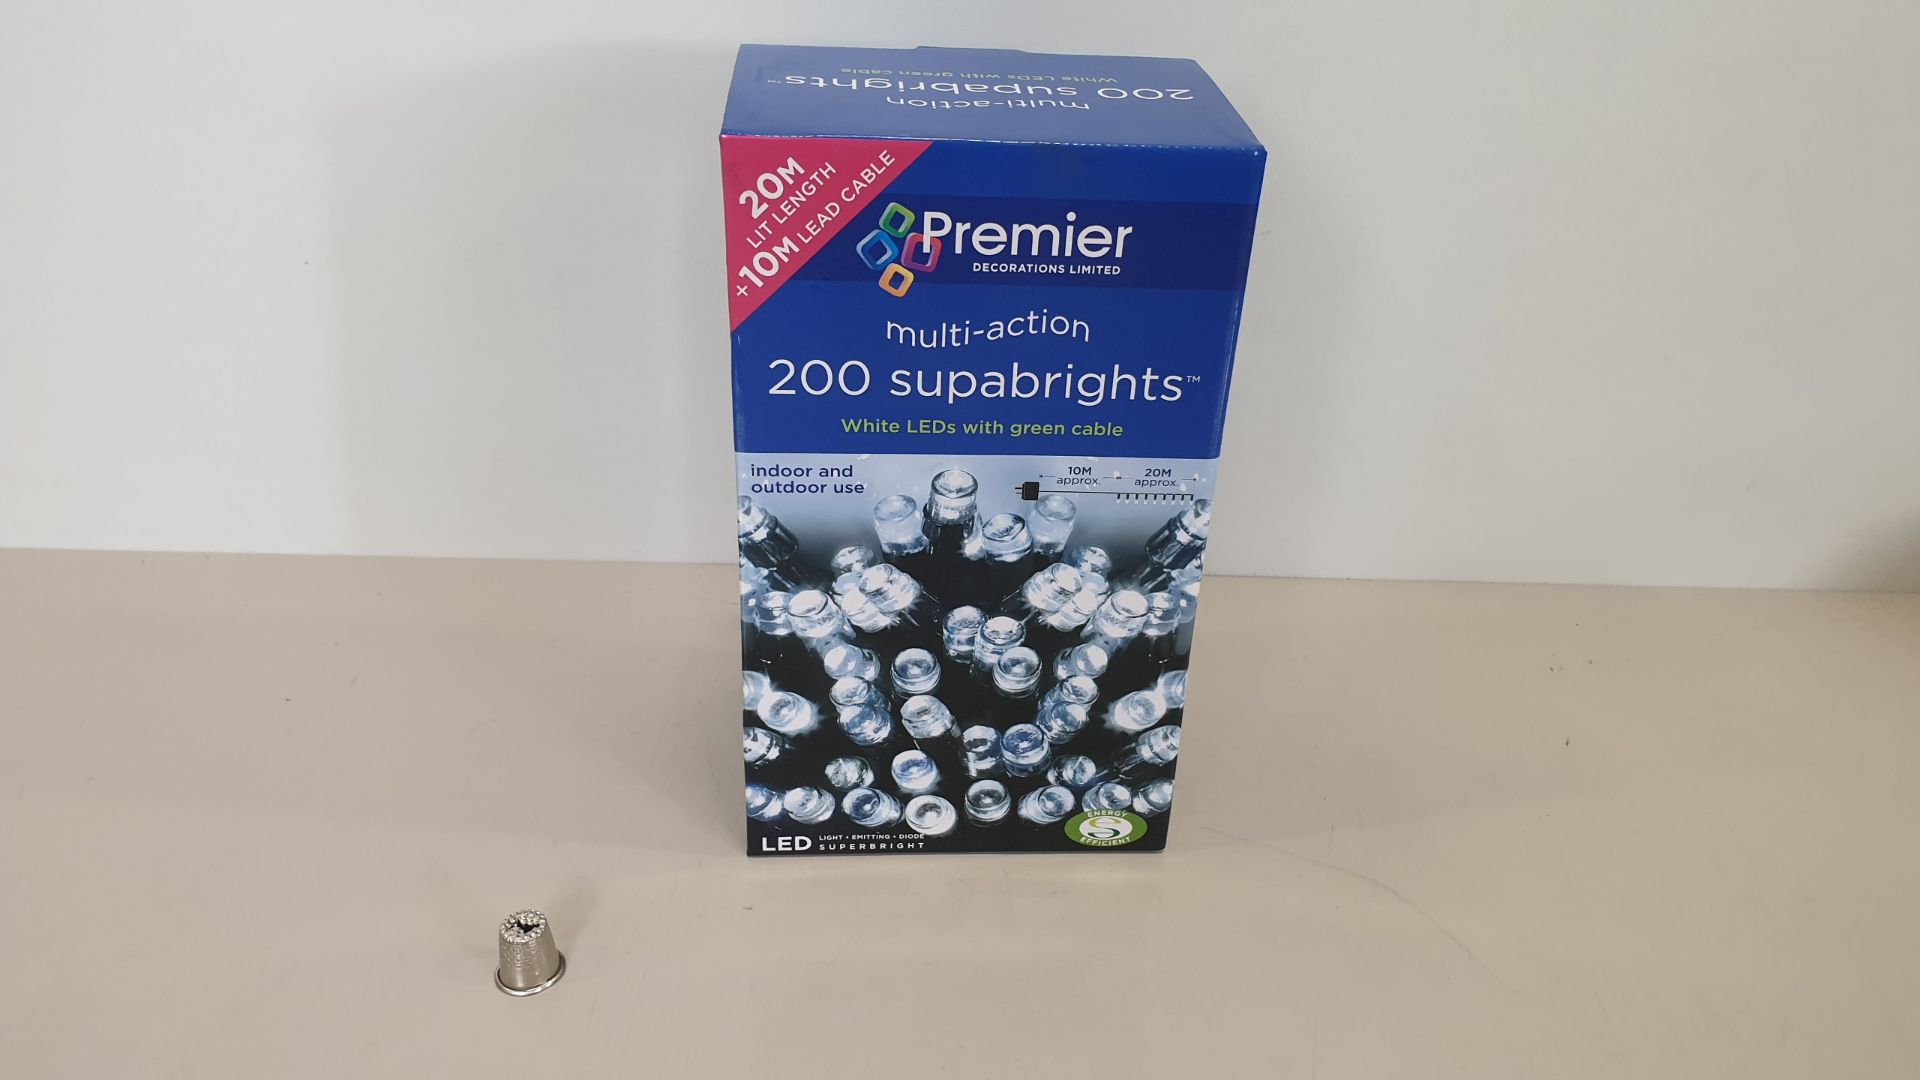 12 X BRAND NEW PREMIER MULTI ACTION 200 SUPABRIGHTS WHITE LEDS WITH GREEN CABLE, (20M LIT LENGTH +